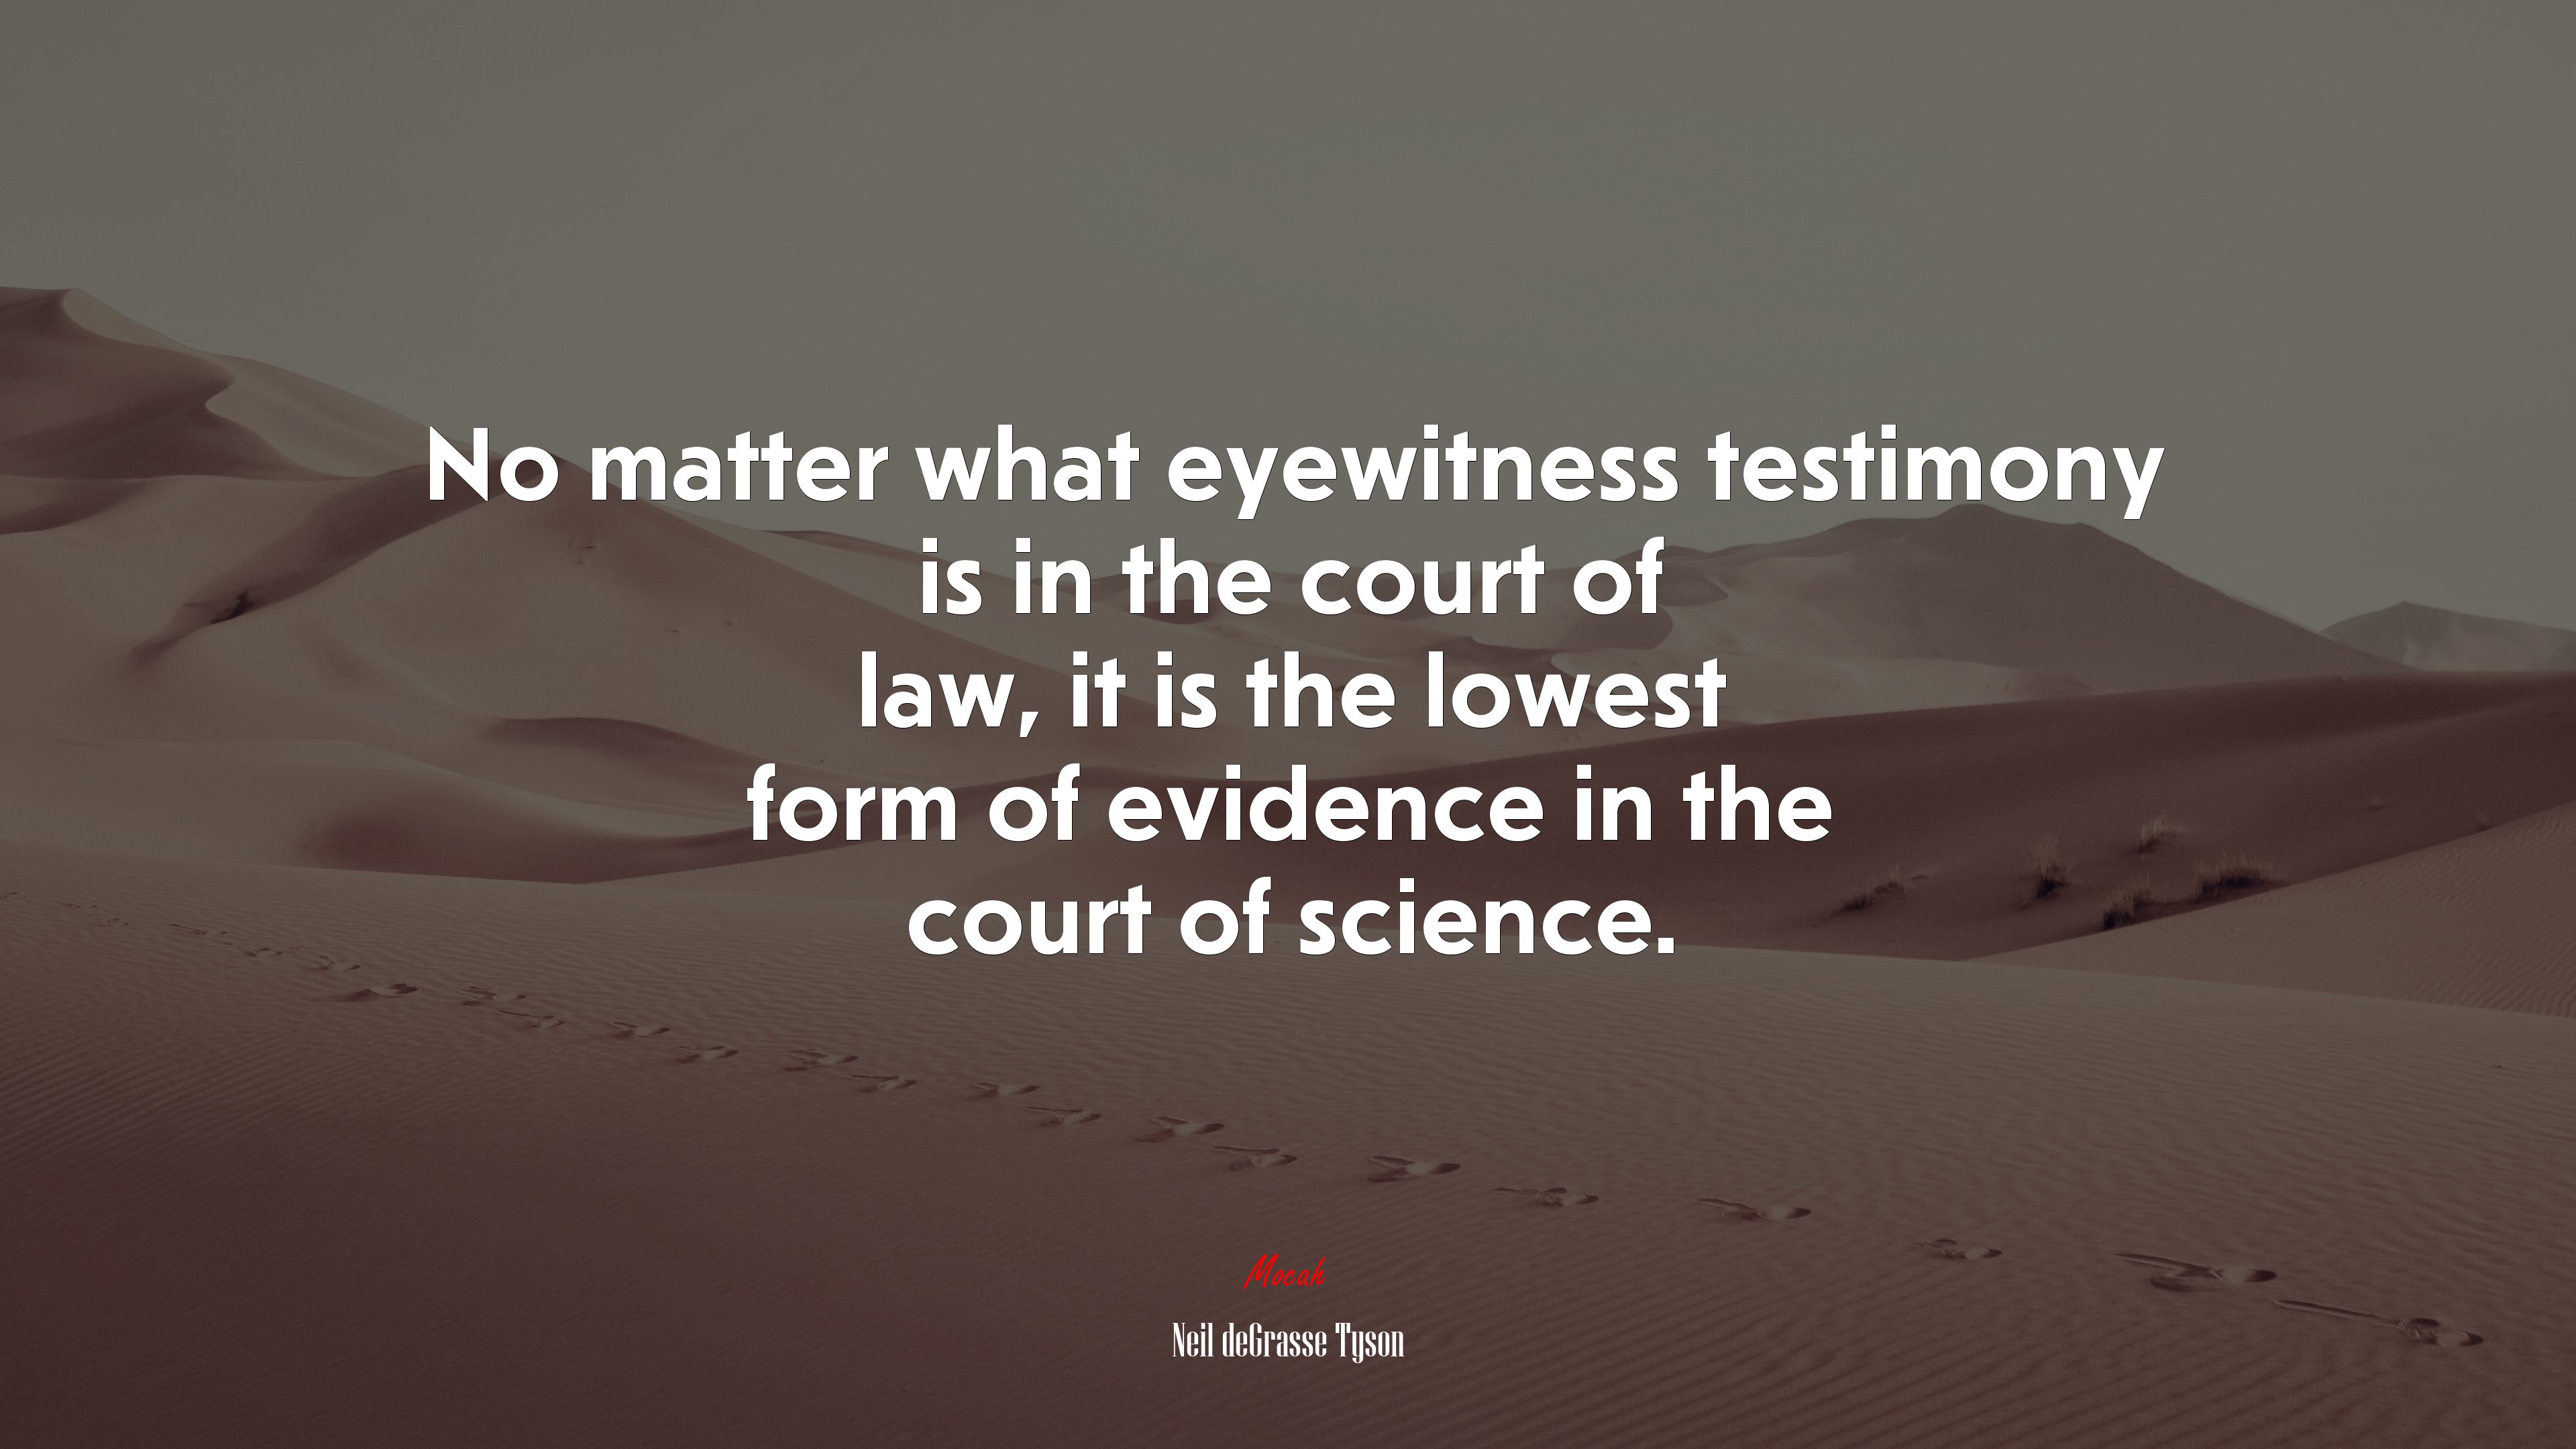 No matter what eyewitness testimony is in the court of law it is the lowest form of evidence in the court of science neil degrasse tyson quote